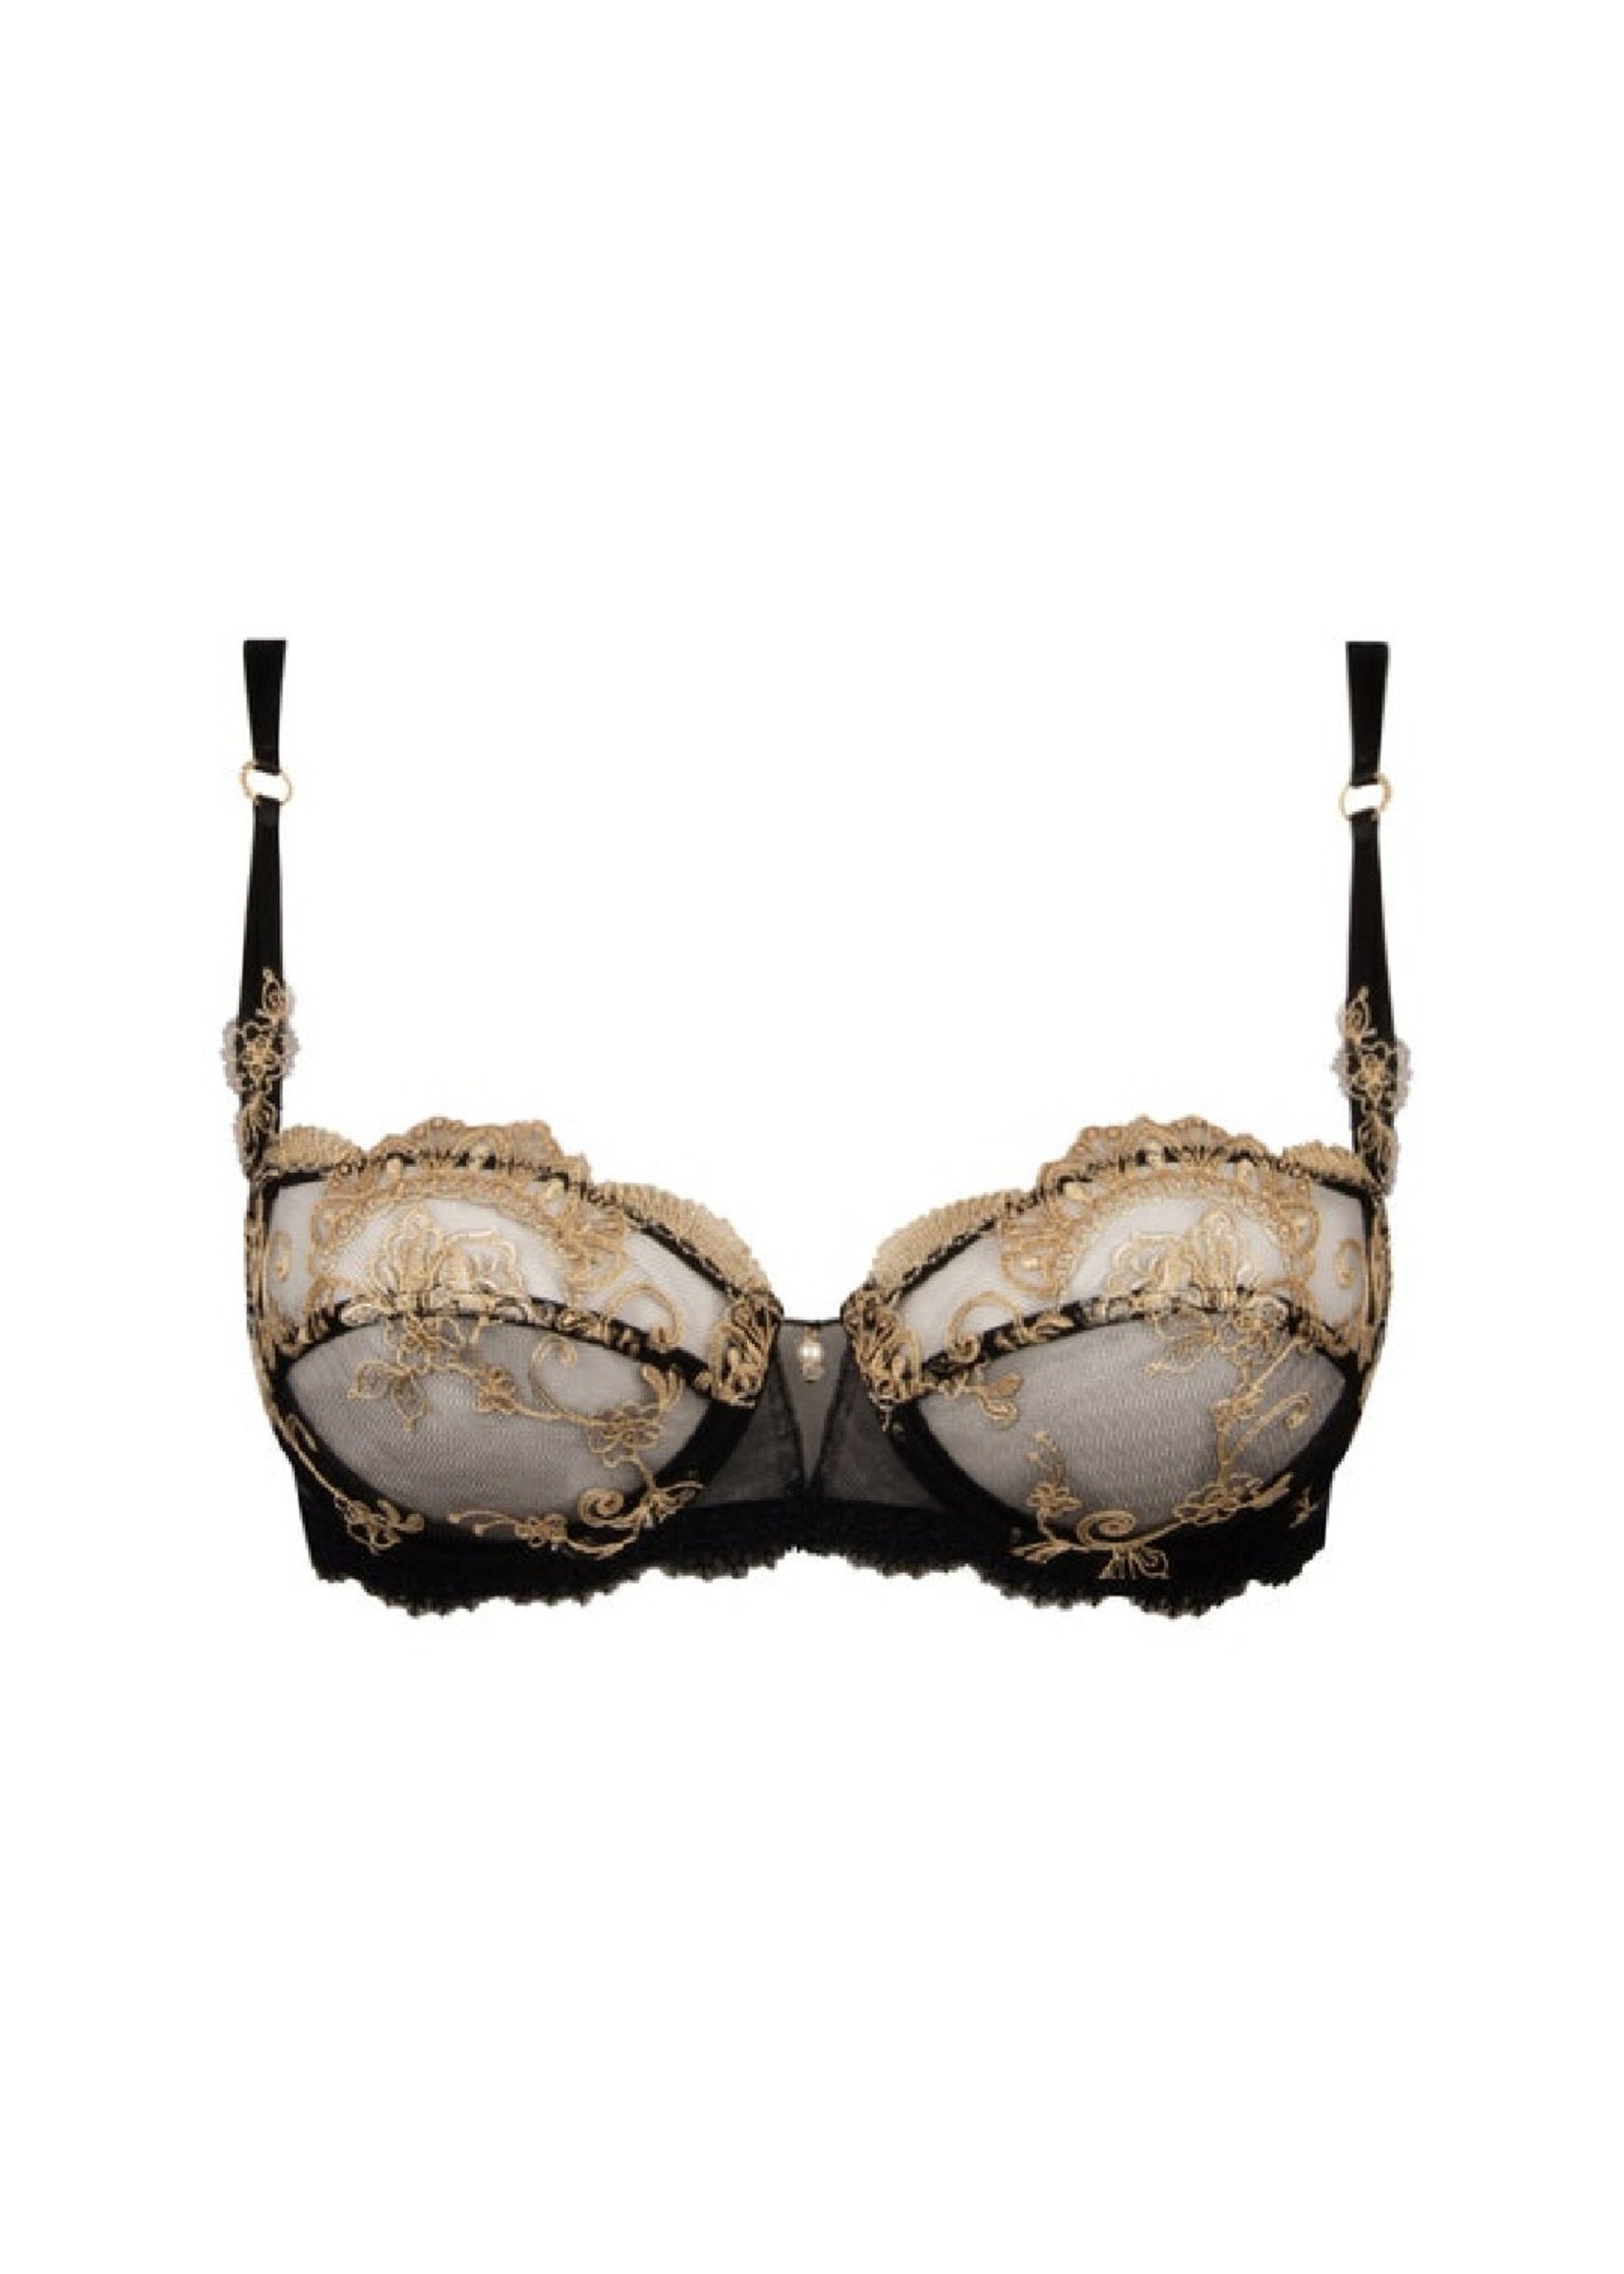 Boudoir Balconette Bra with Lace and Embroidery - Déesse